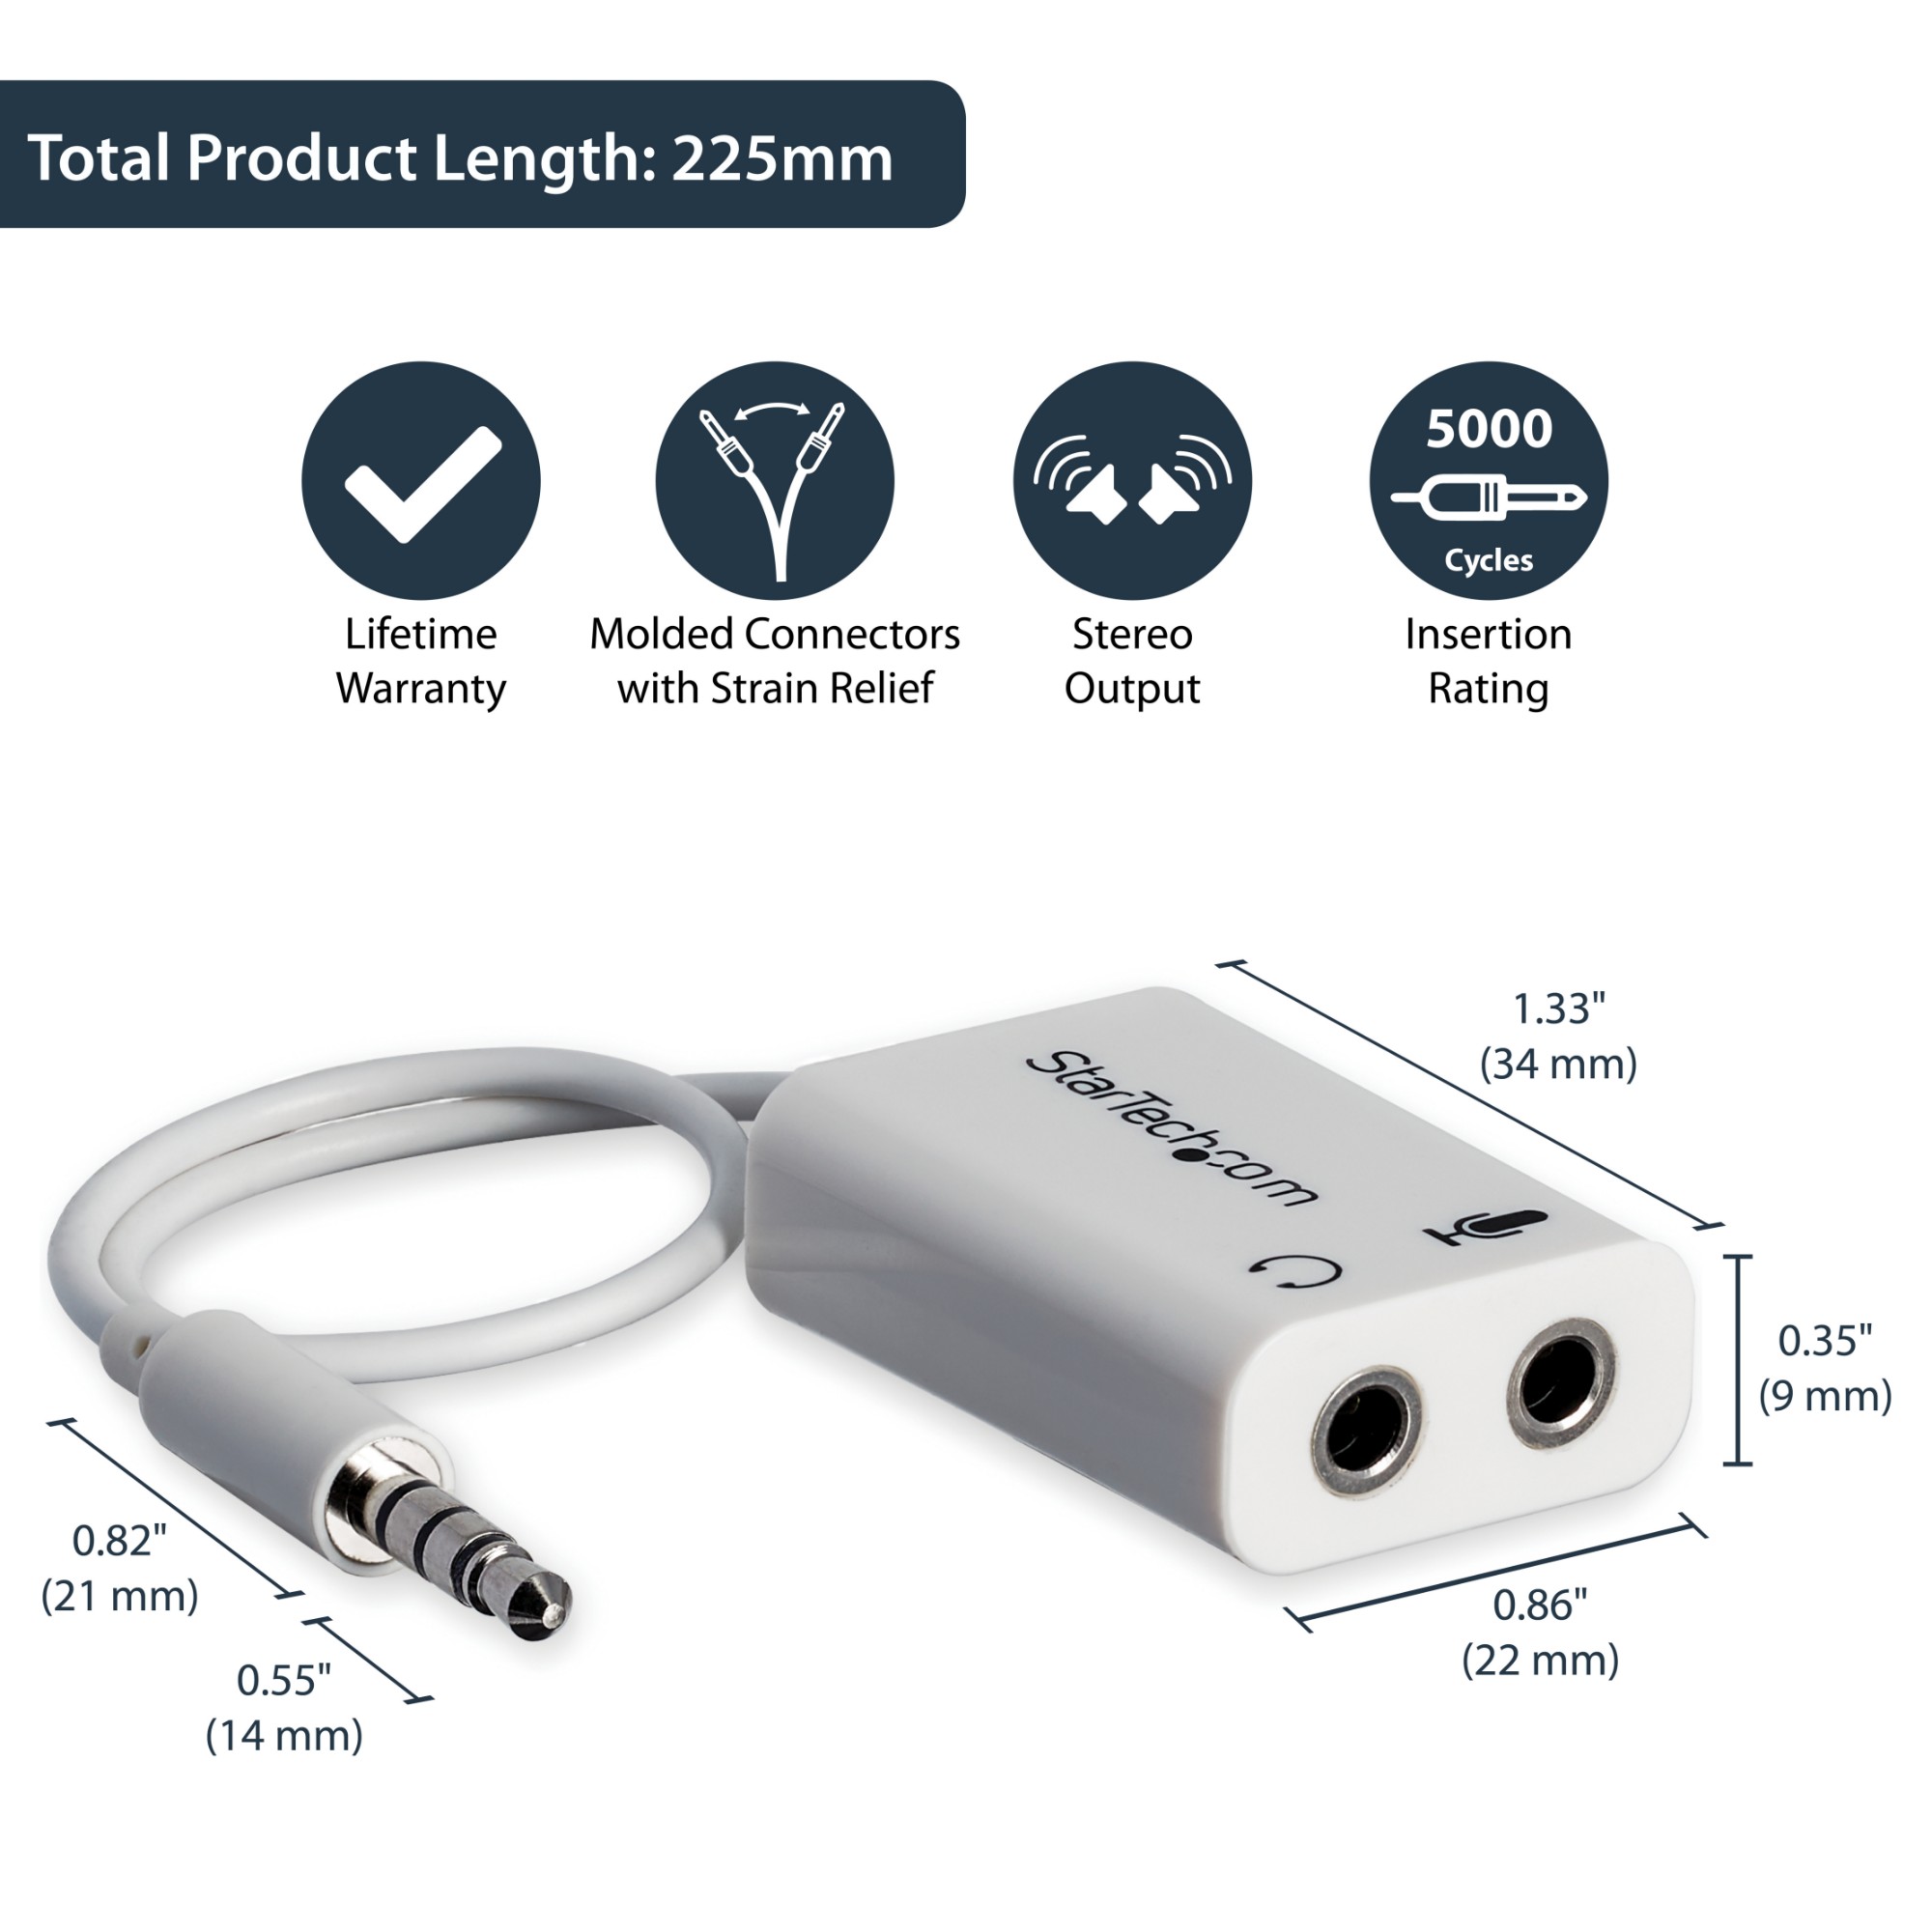 StarTech.com White headset adapter for headsets with separate headphone / microphone plugs - 3.5mm 4 position to 2x 3 position 3.5mm M/F